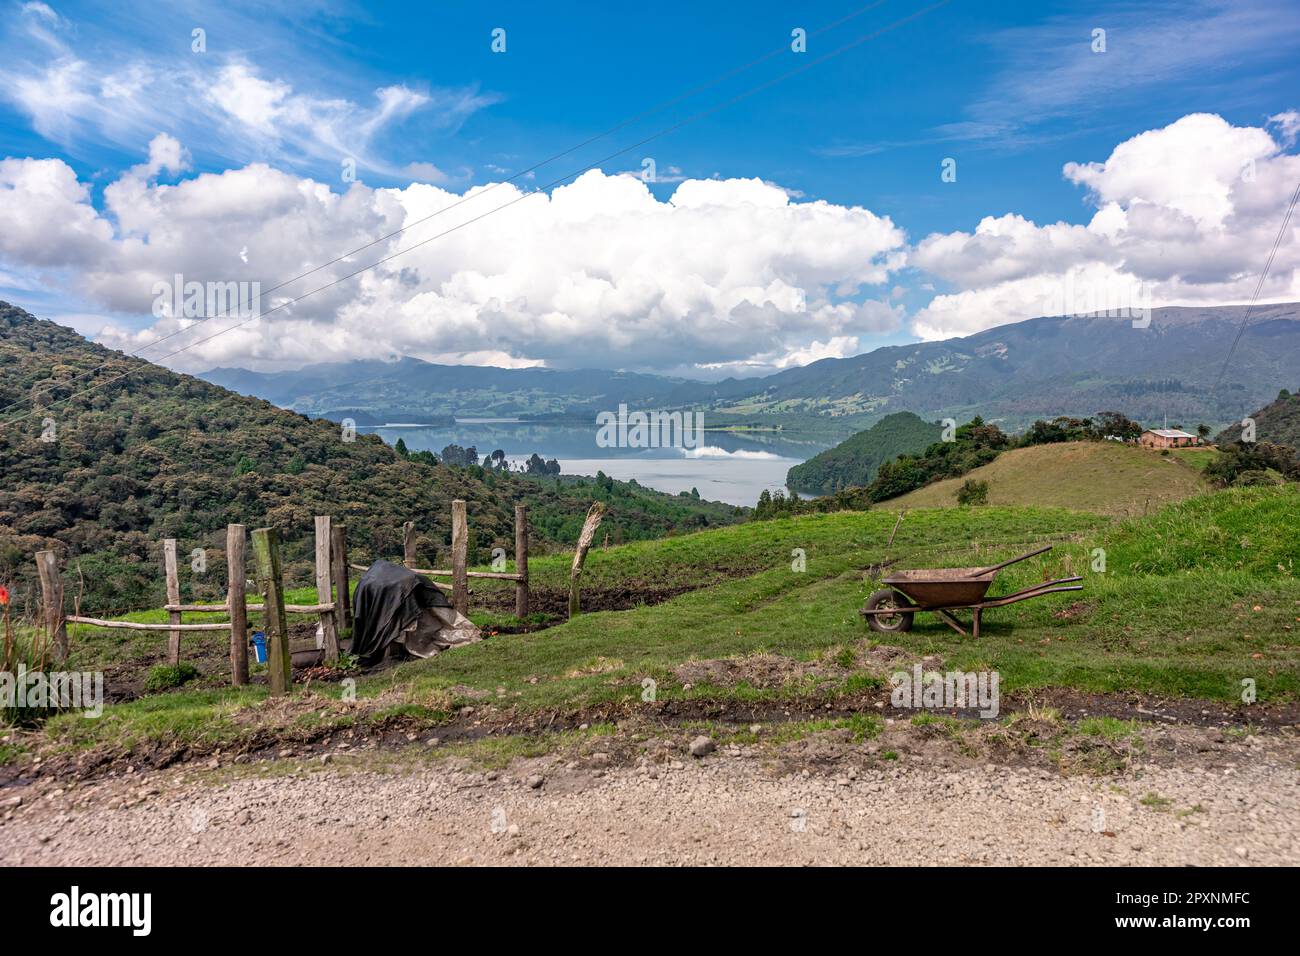 forests and mountains in the beautiful Colombian nature. Stock Photo